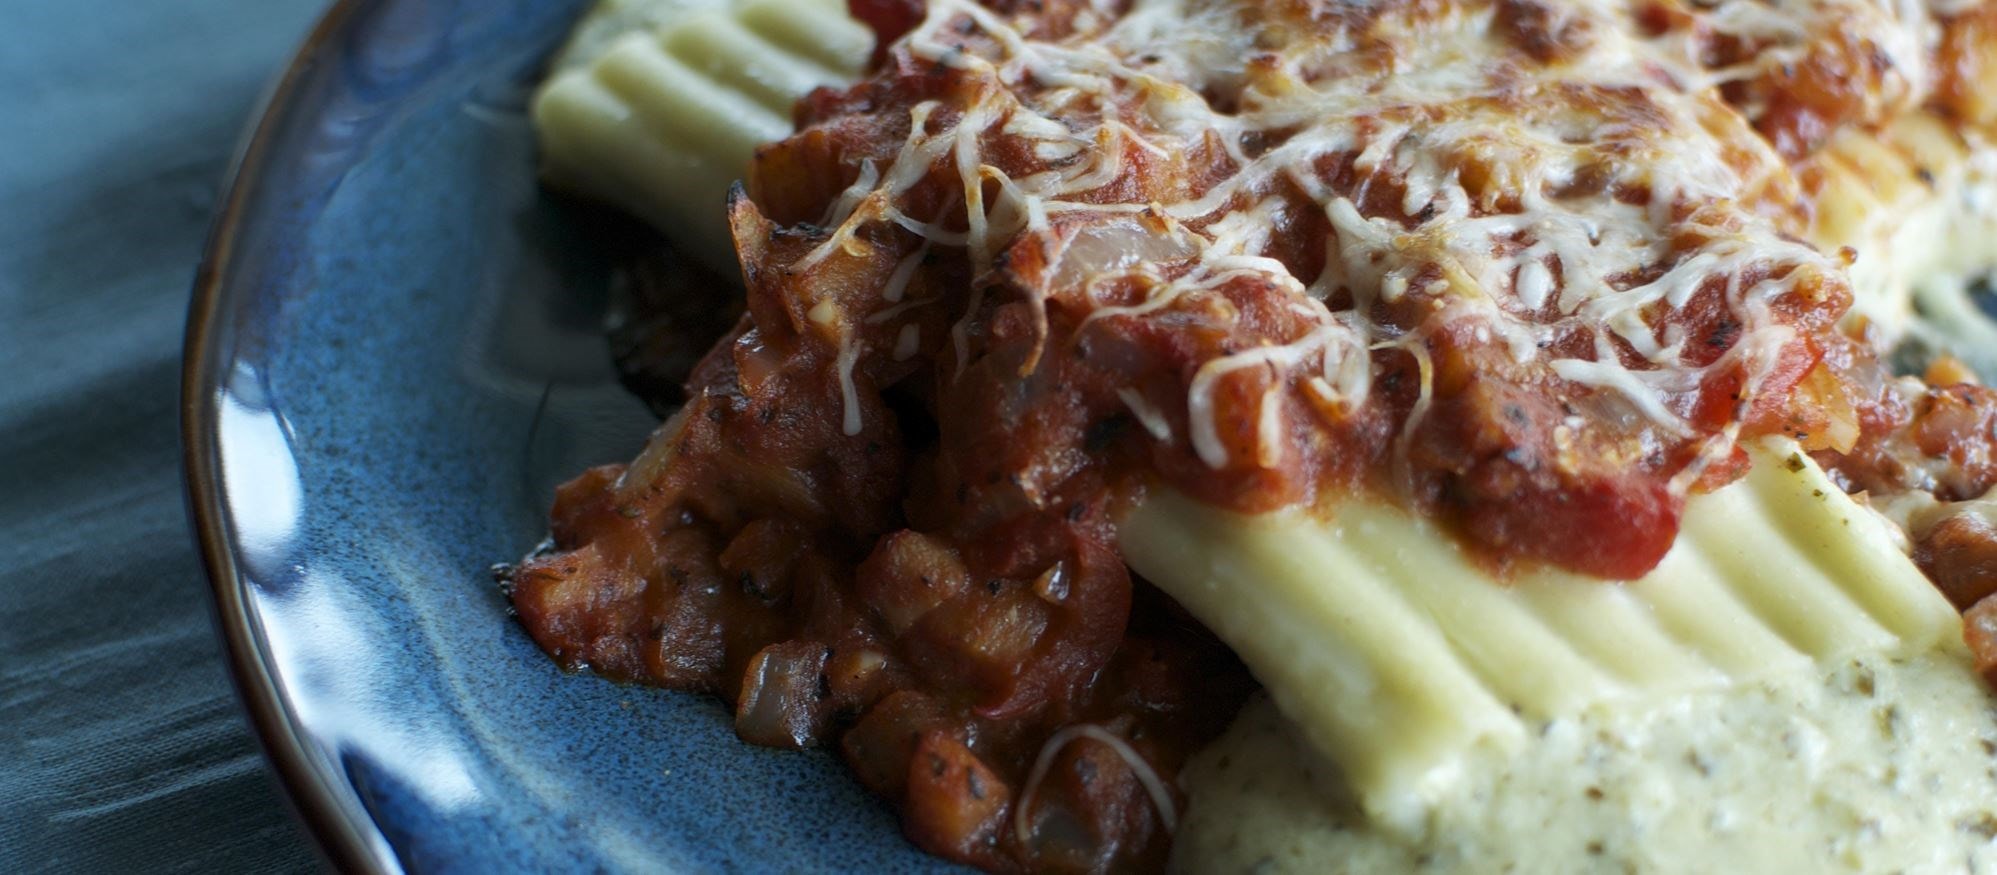 Manicotti with Eggplant and Red Pepper Sauce